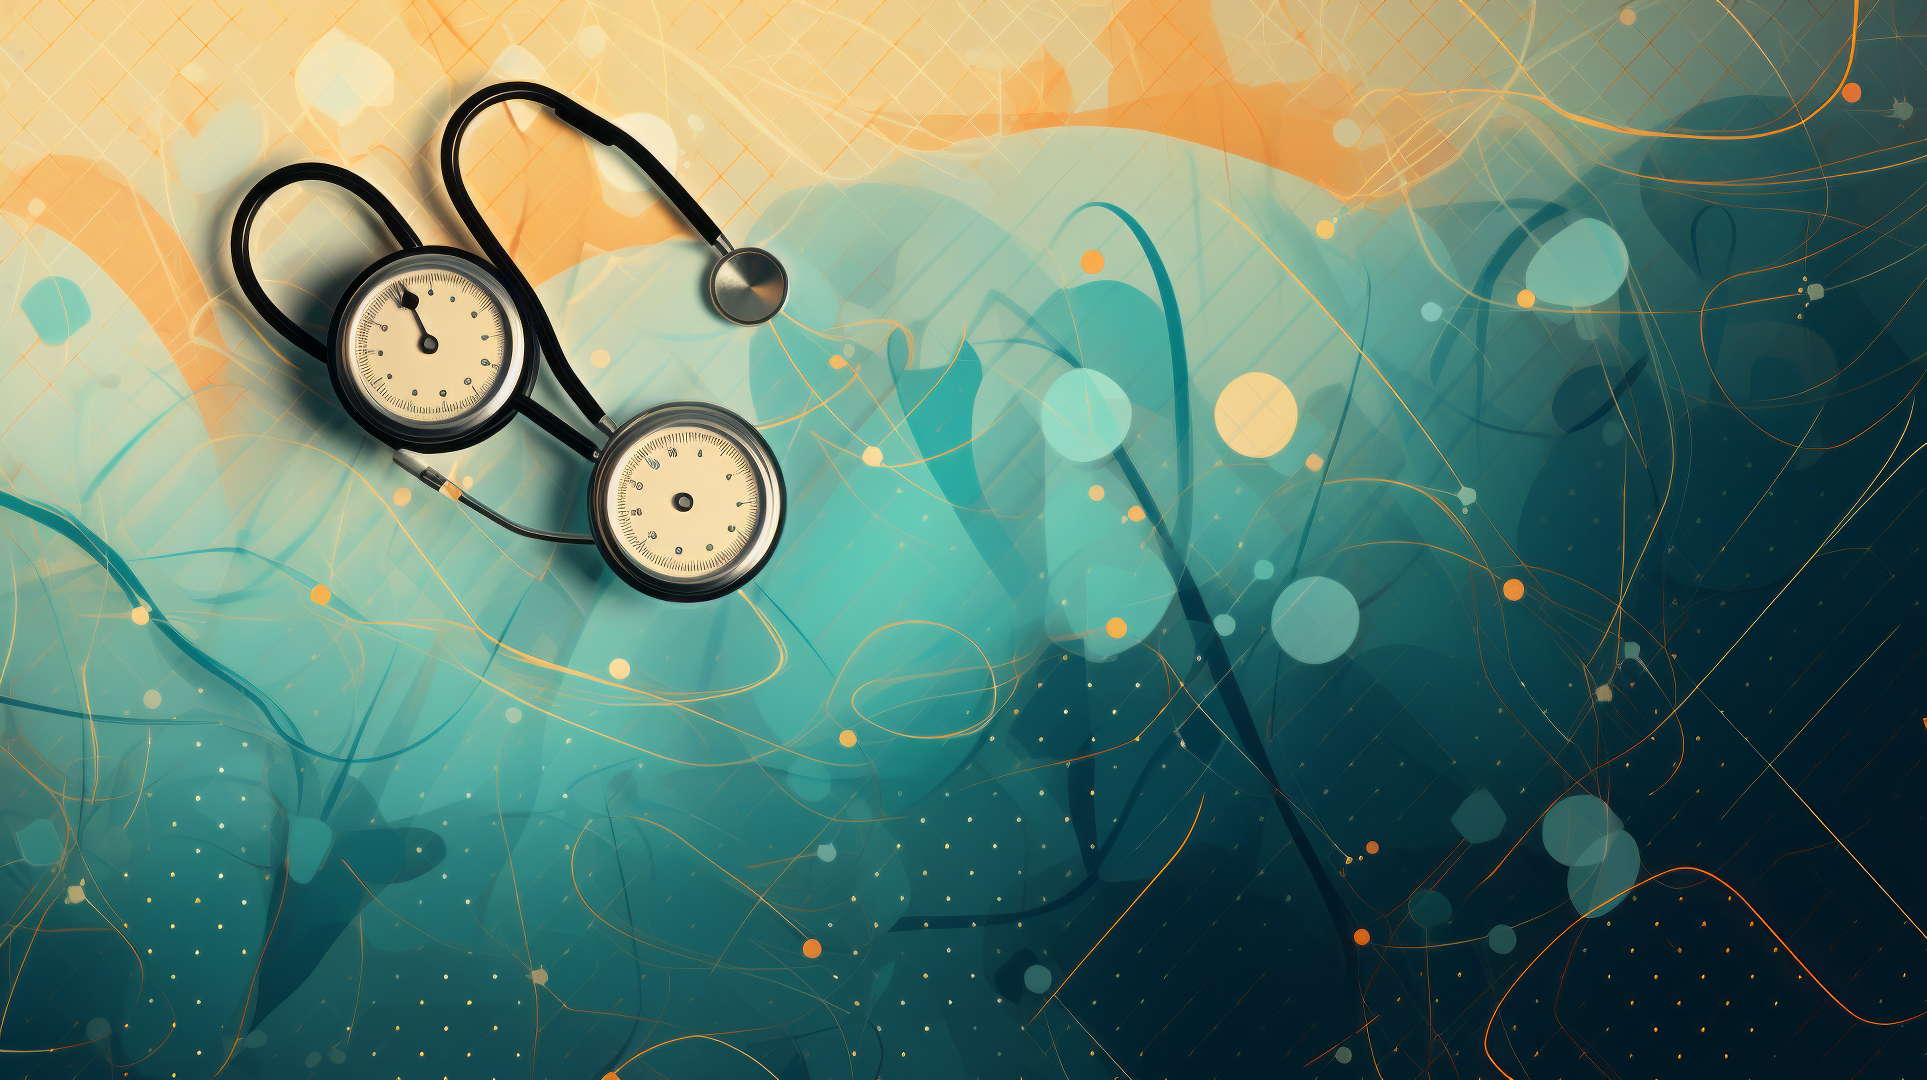 HD desktop wallpaper featuring an artistic representation of a stethoscope on a stylized medical background with abstract patterns and warm color tones.